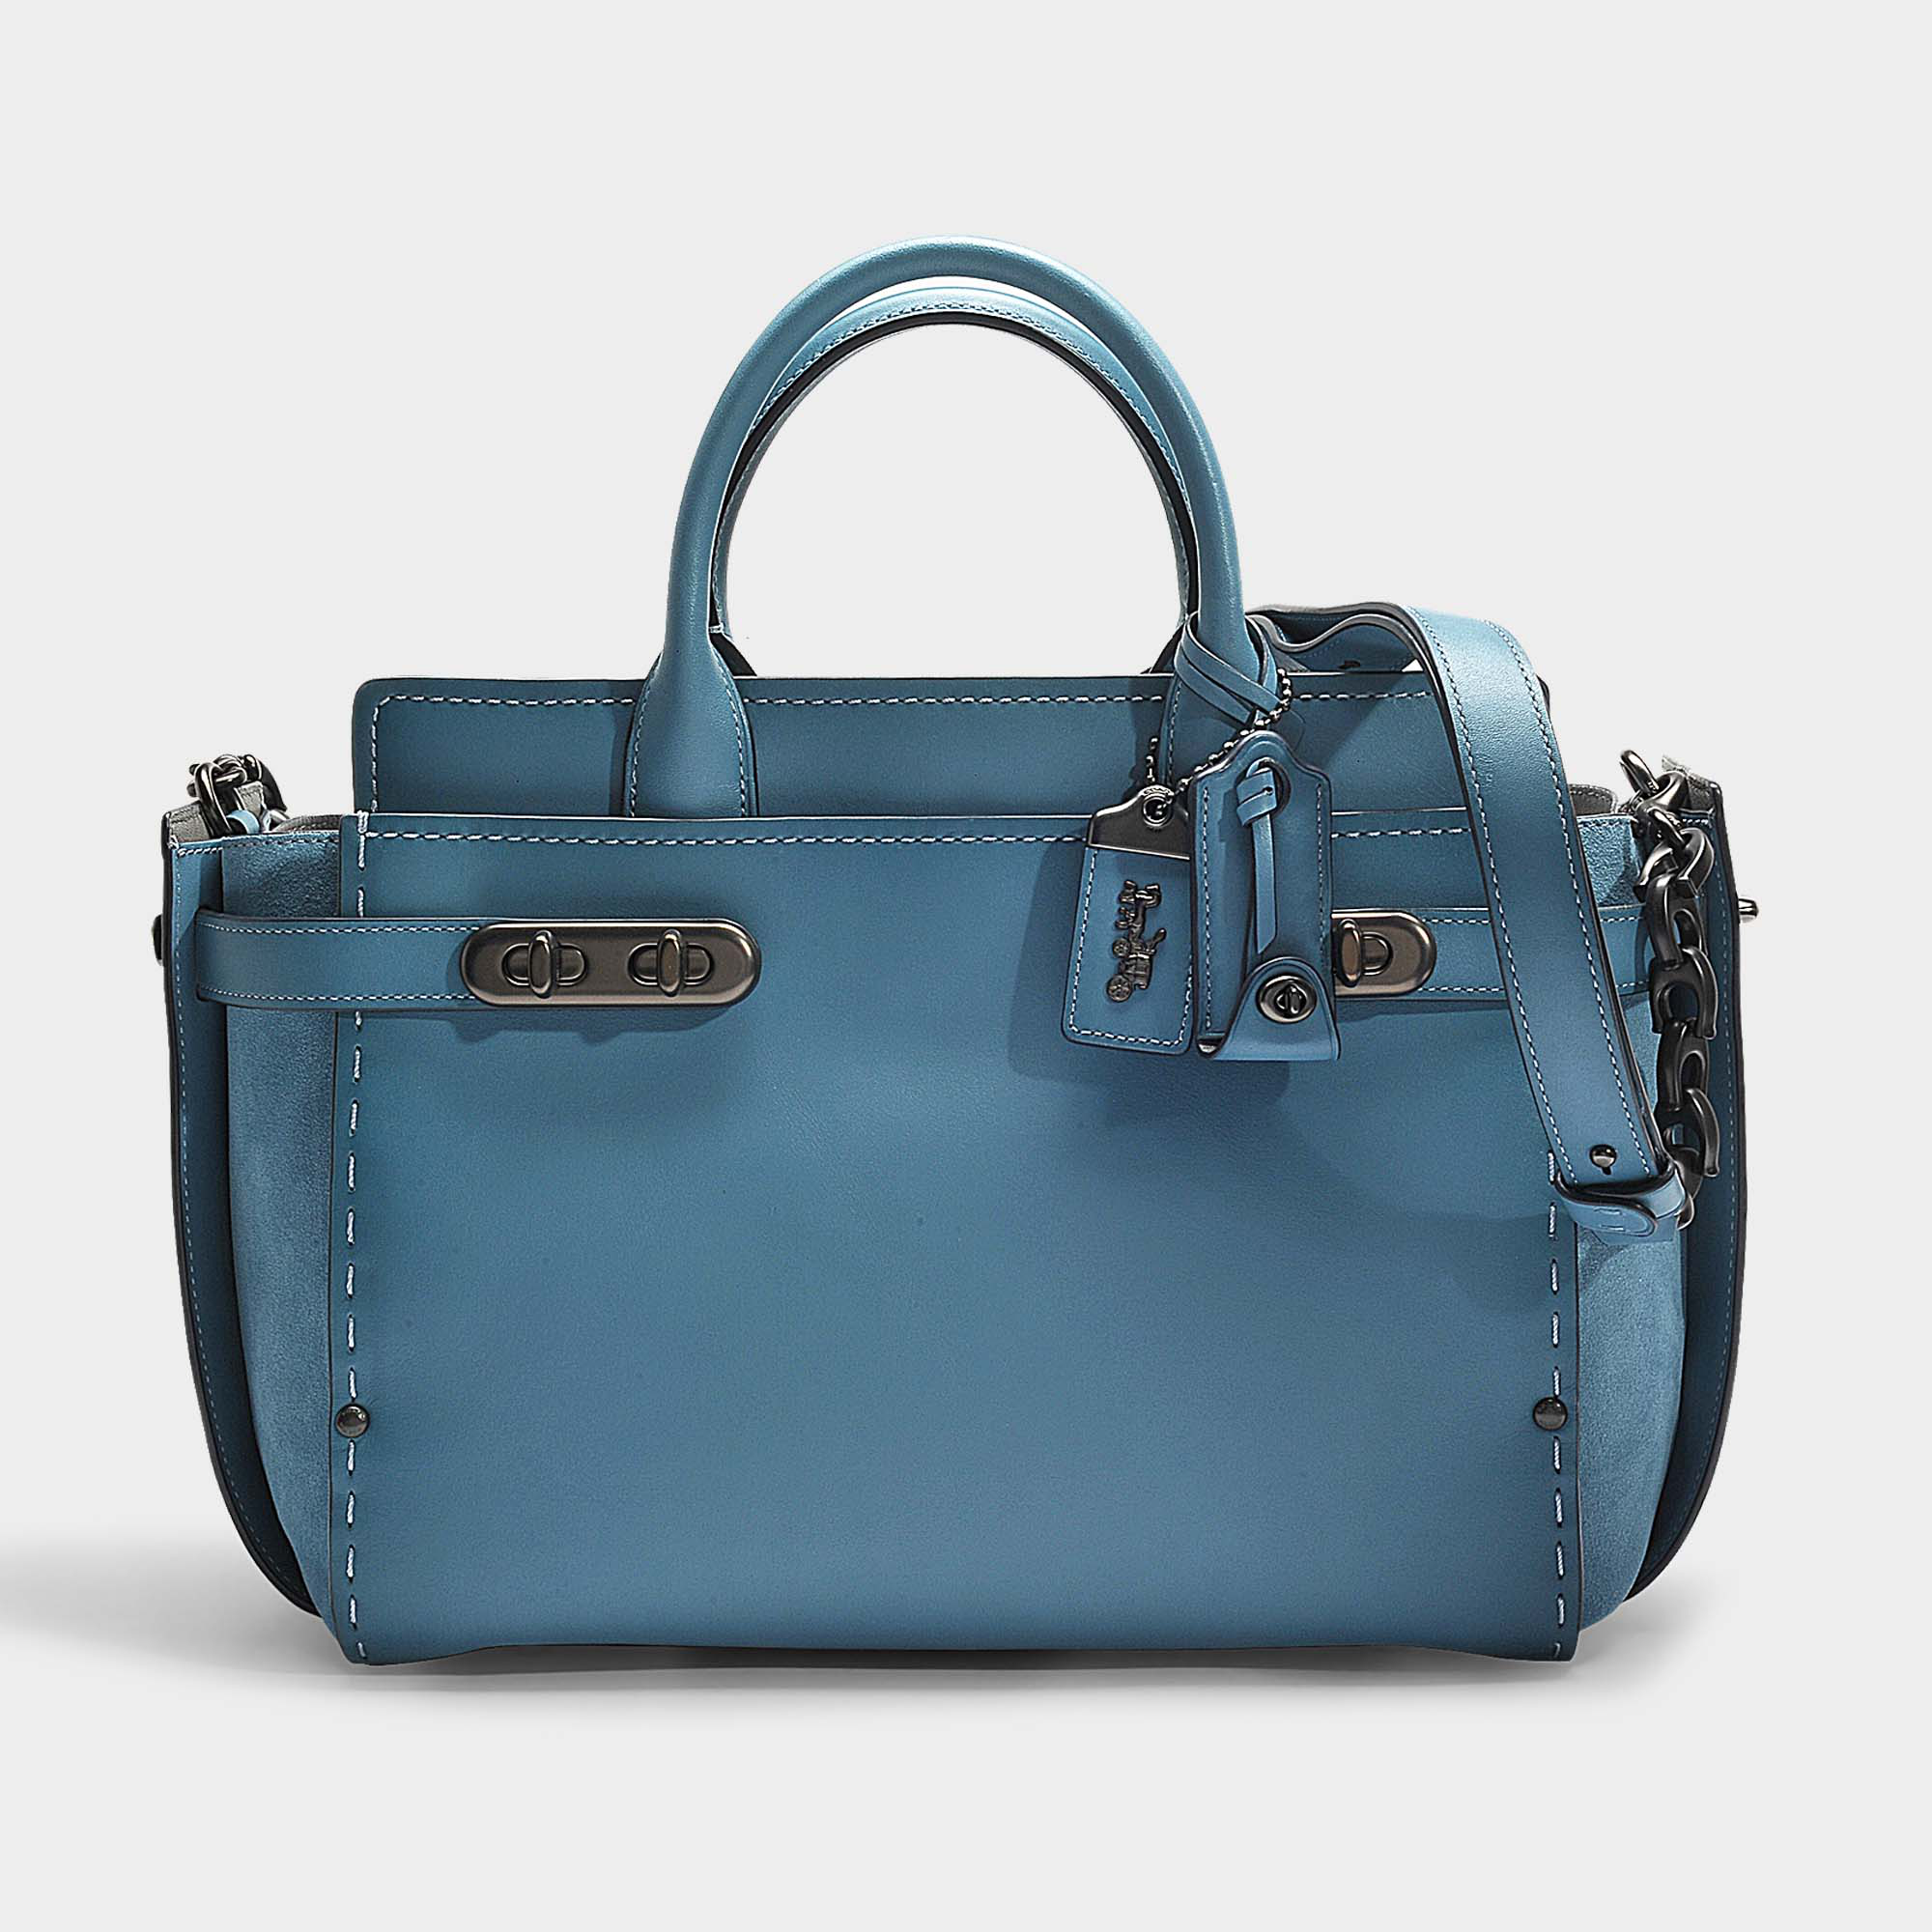 Coach | Double Swagger Bag In Chambray Calfskin In Blue | ModeSens